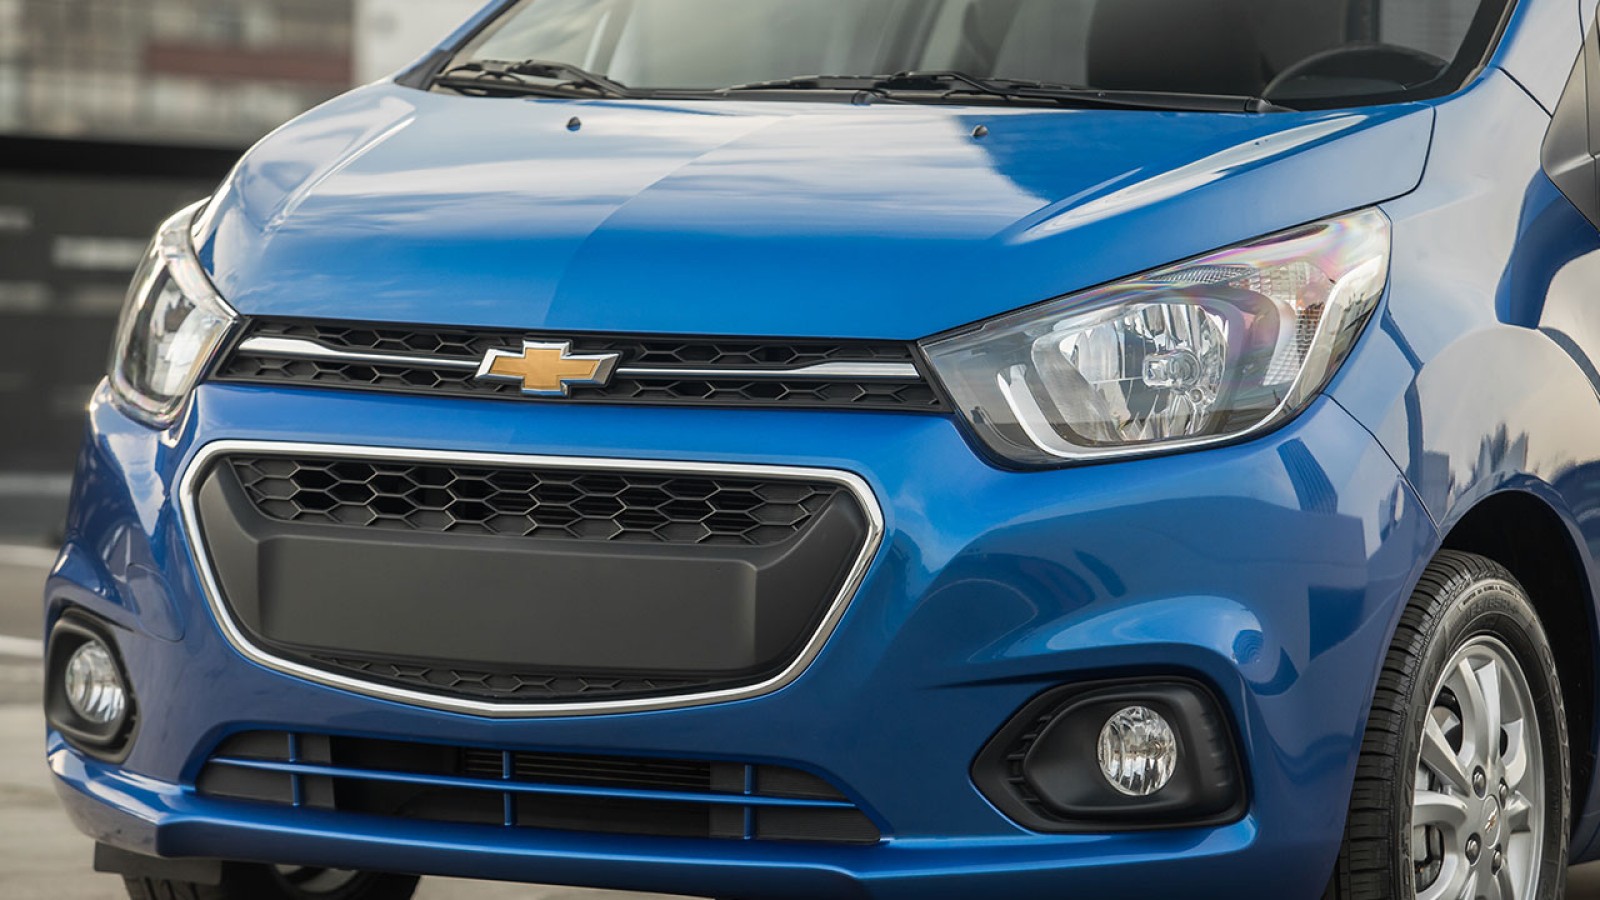 GM Discontinues Chevy Beat And Spark In Mexico